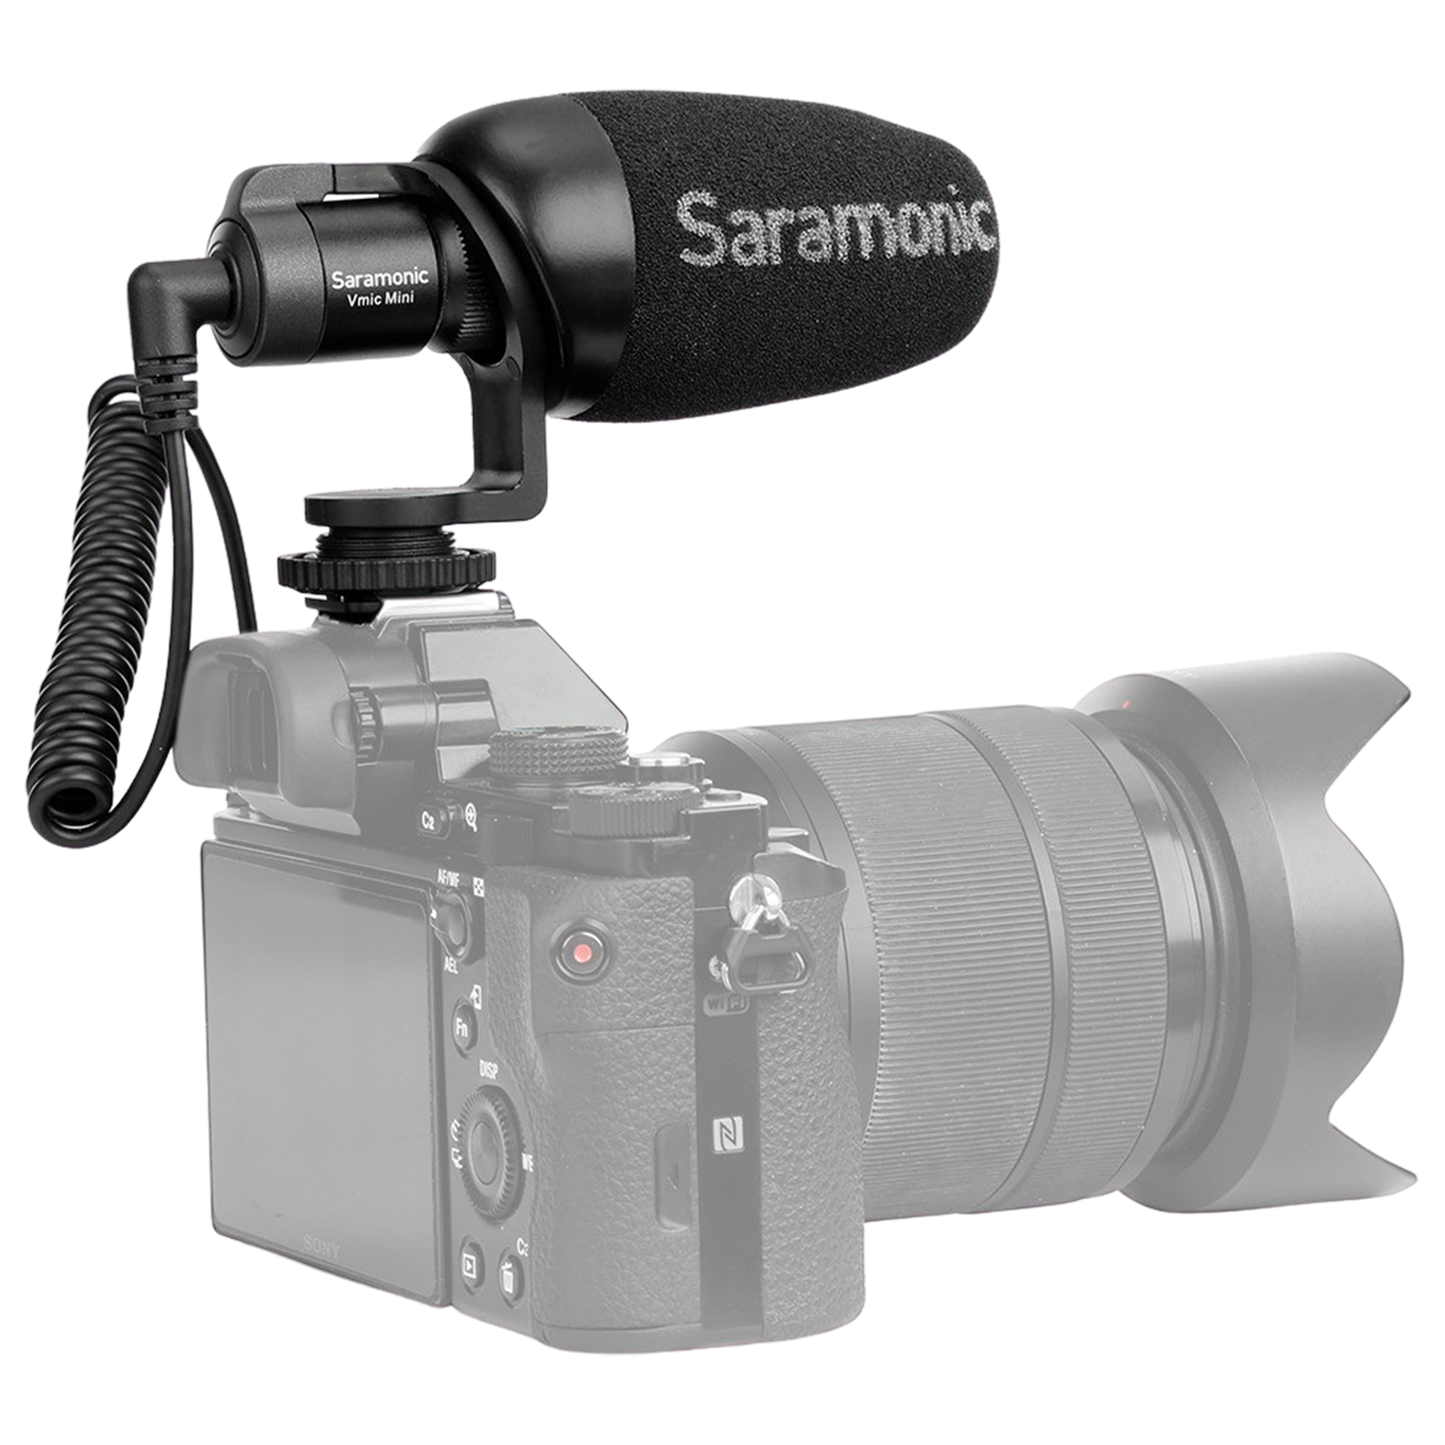 Saramonic VMic Mini condenser video microphone for cameras and smartphones